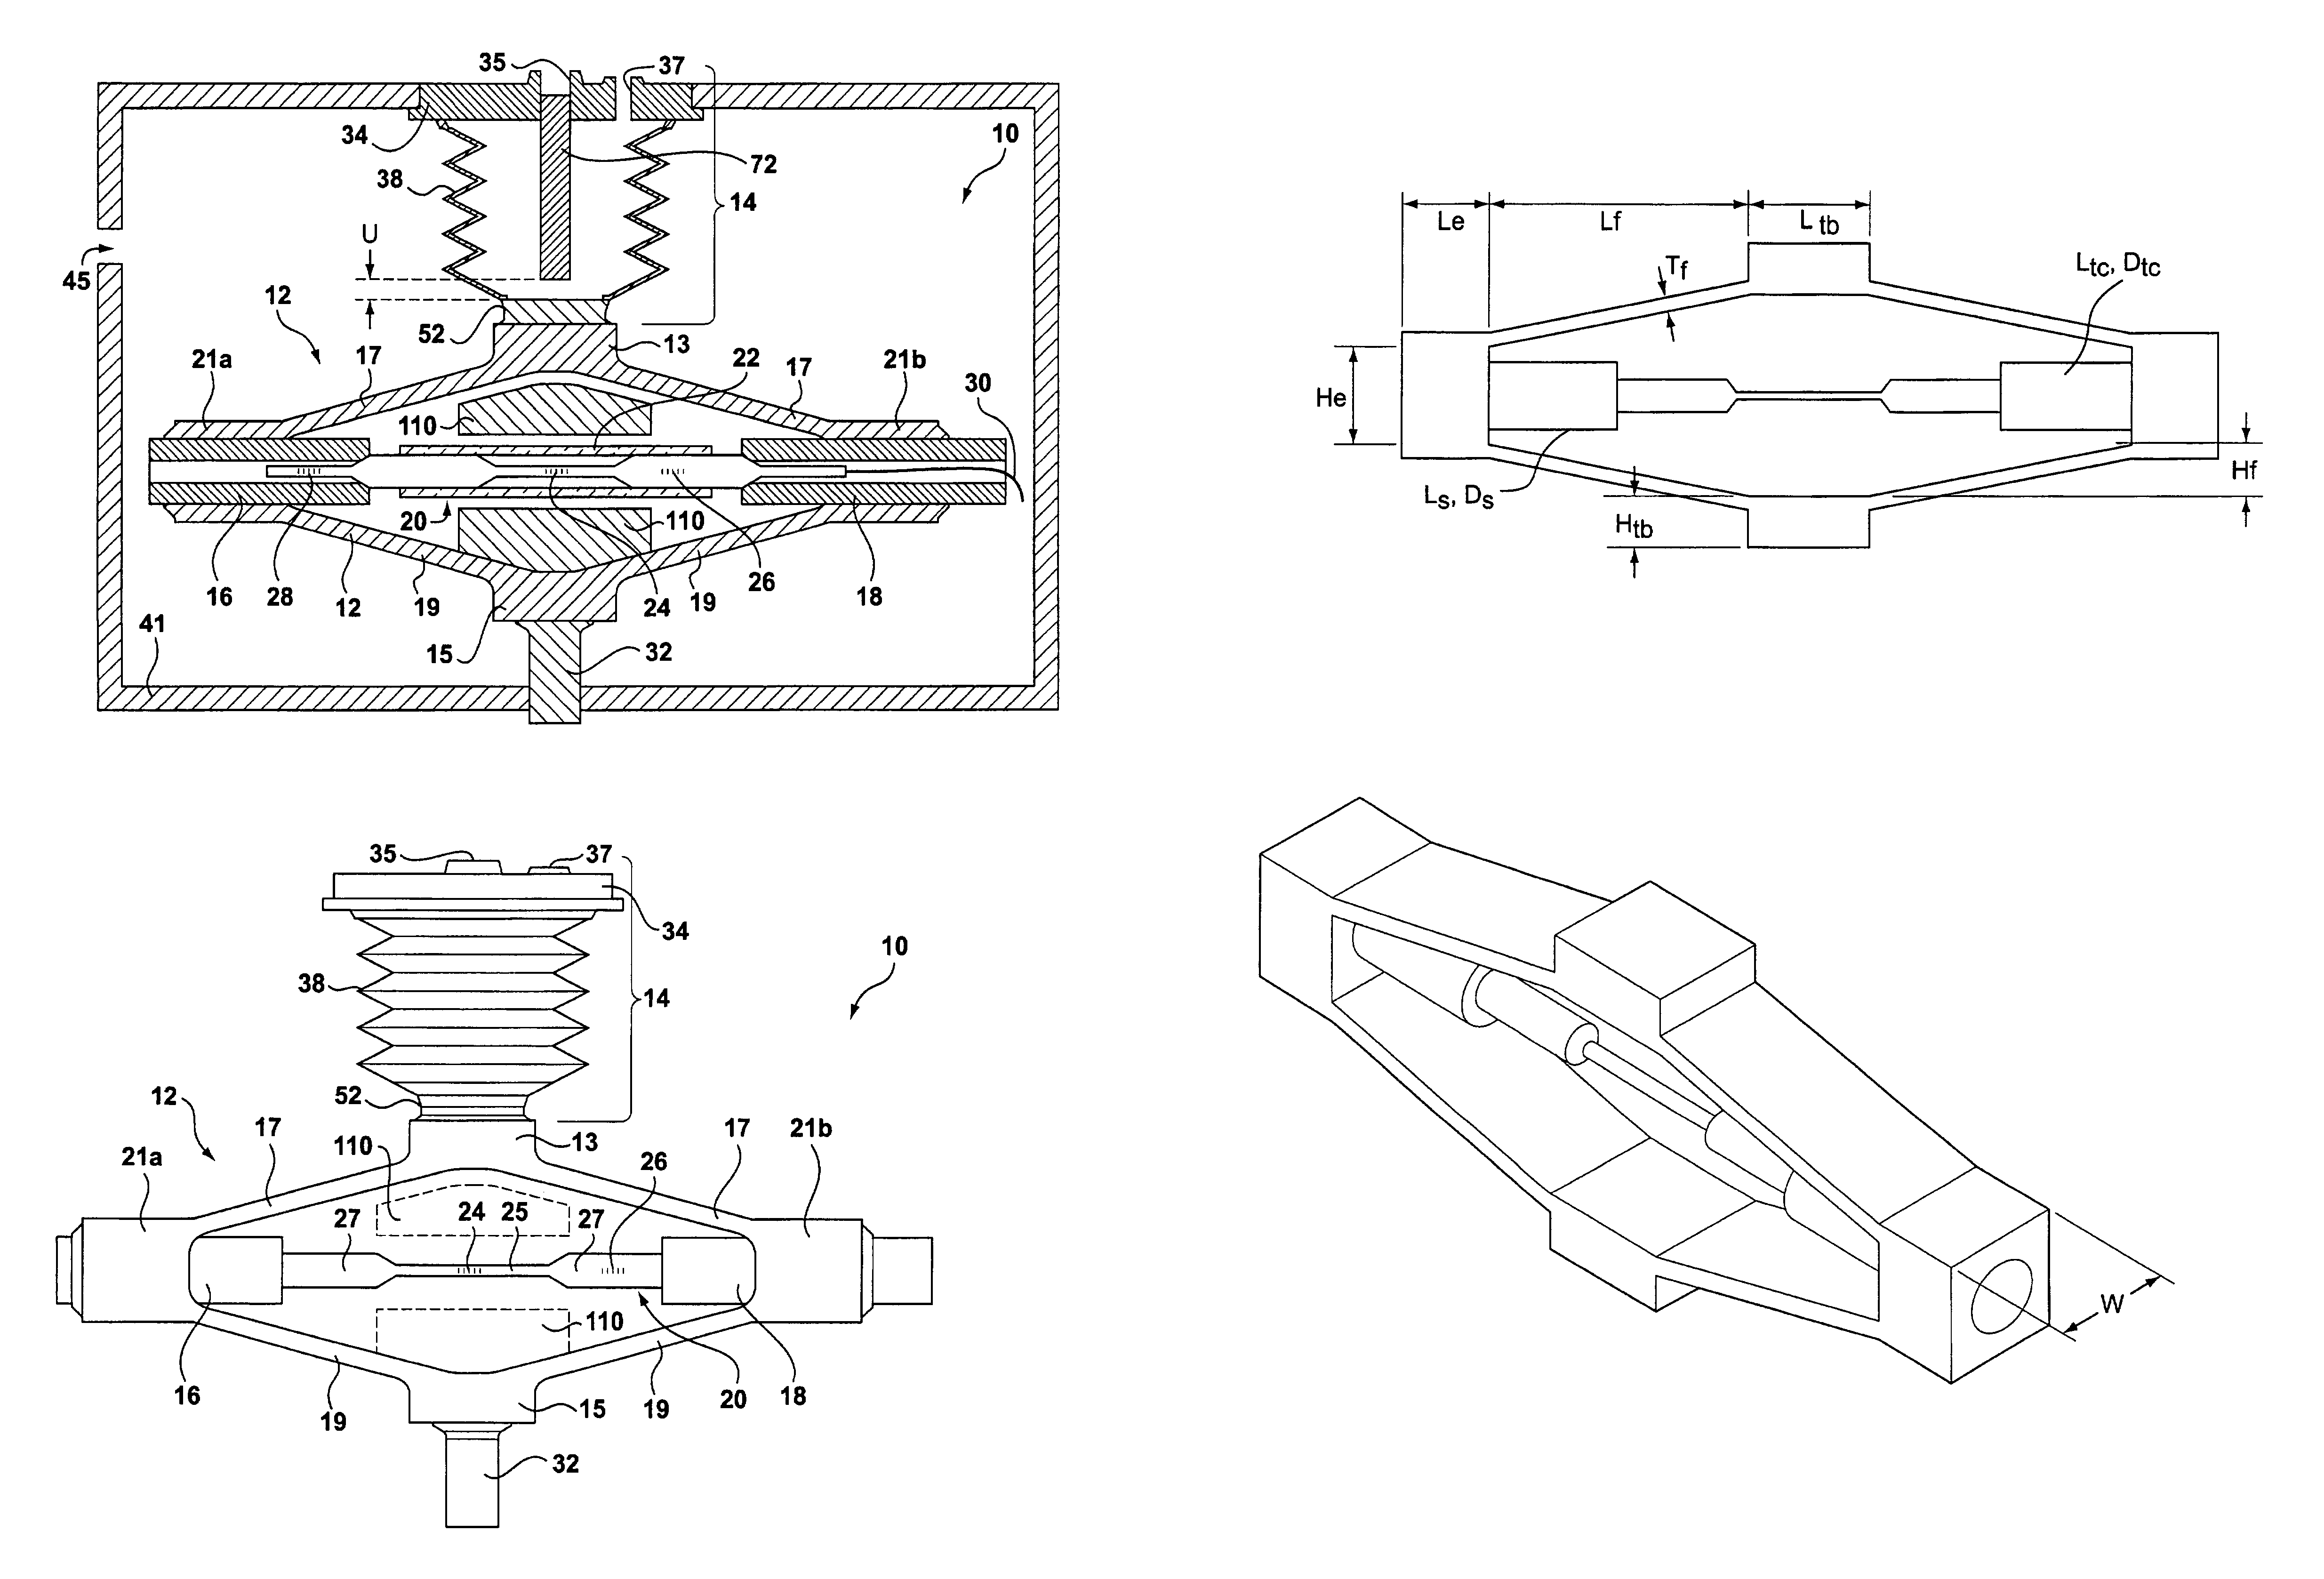 Optical differential pressure transducer utilizing a bellows and flexure system